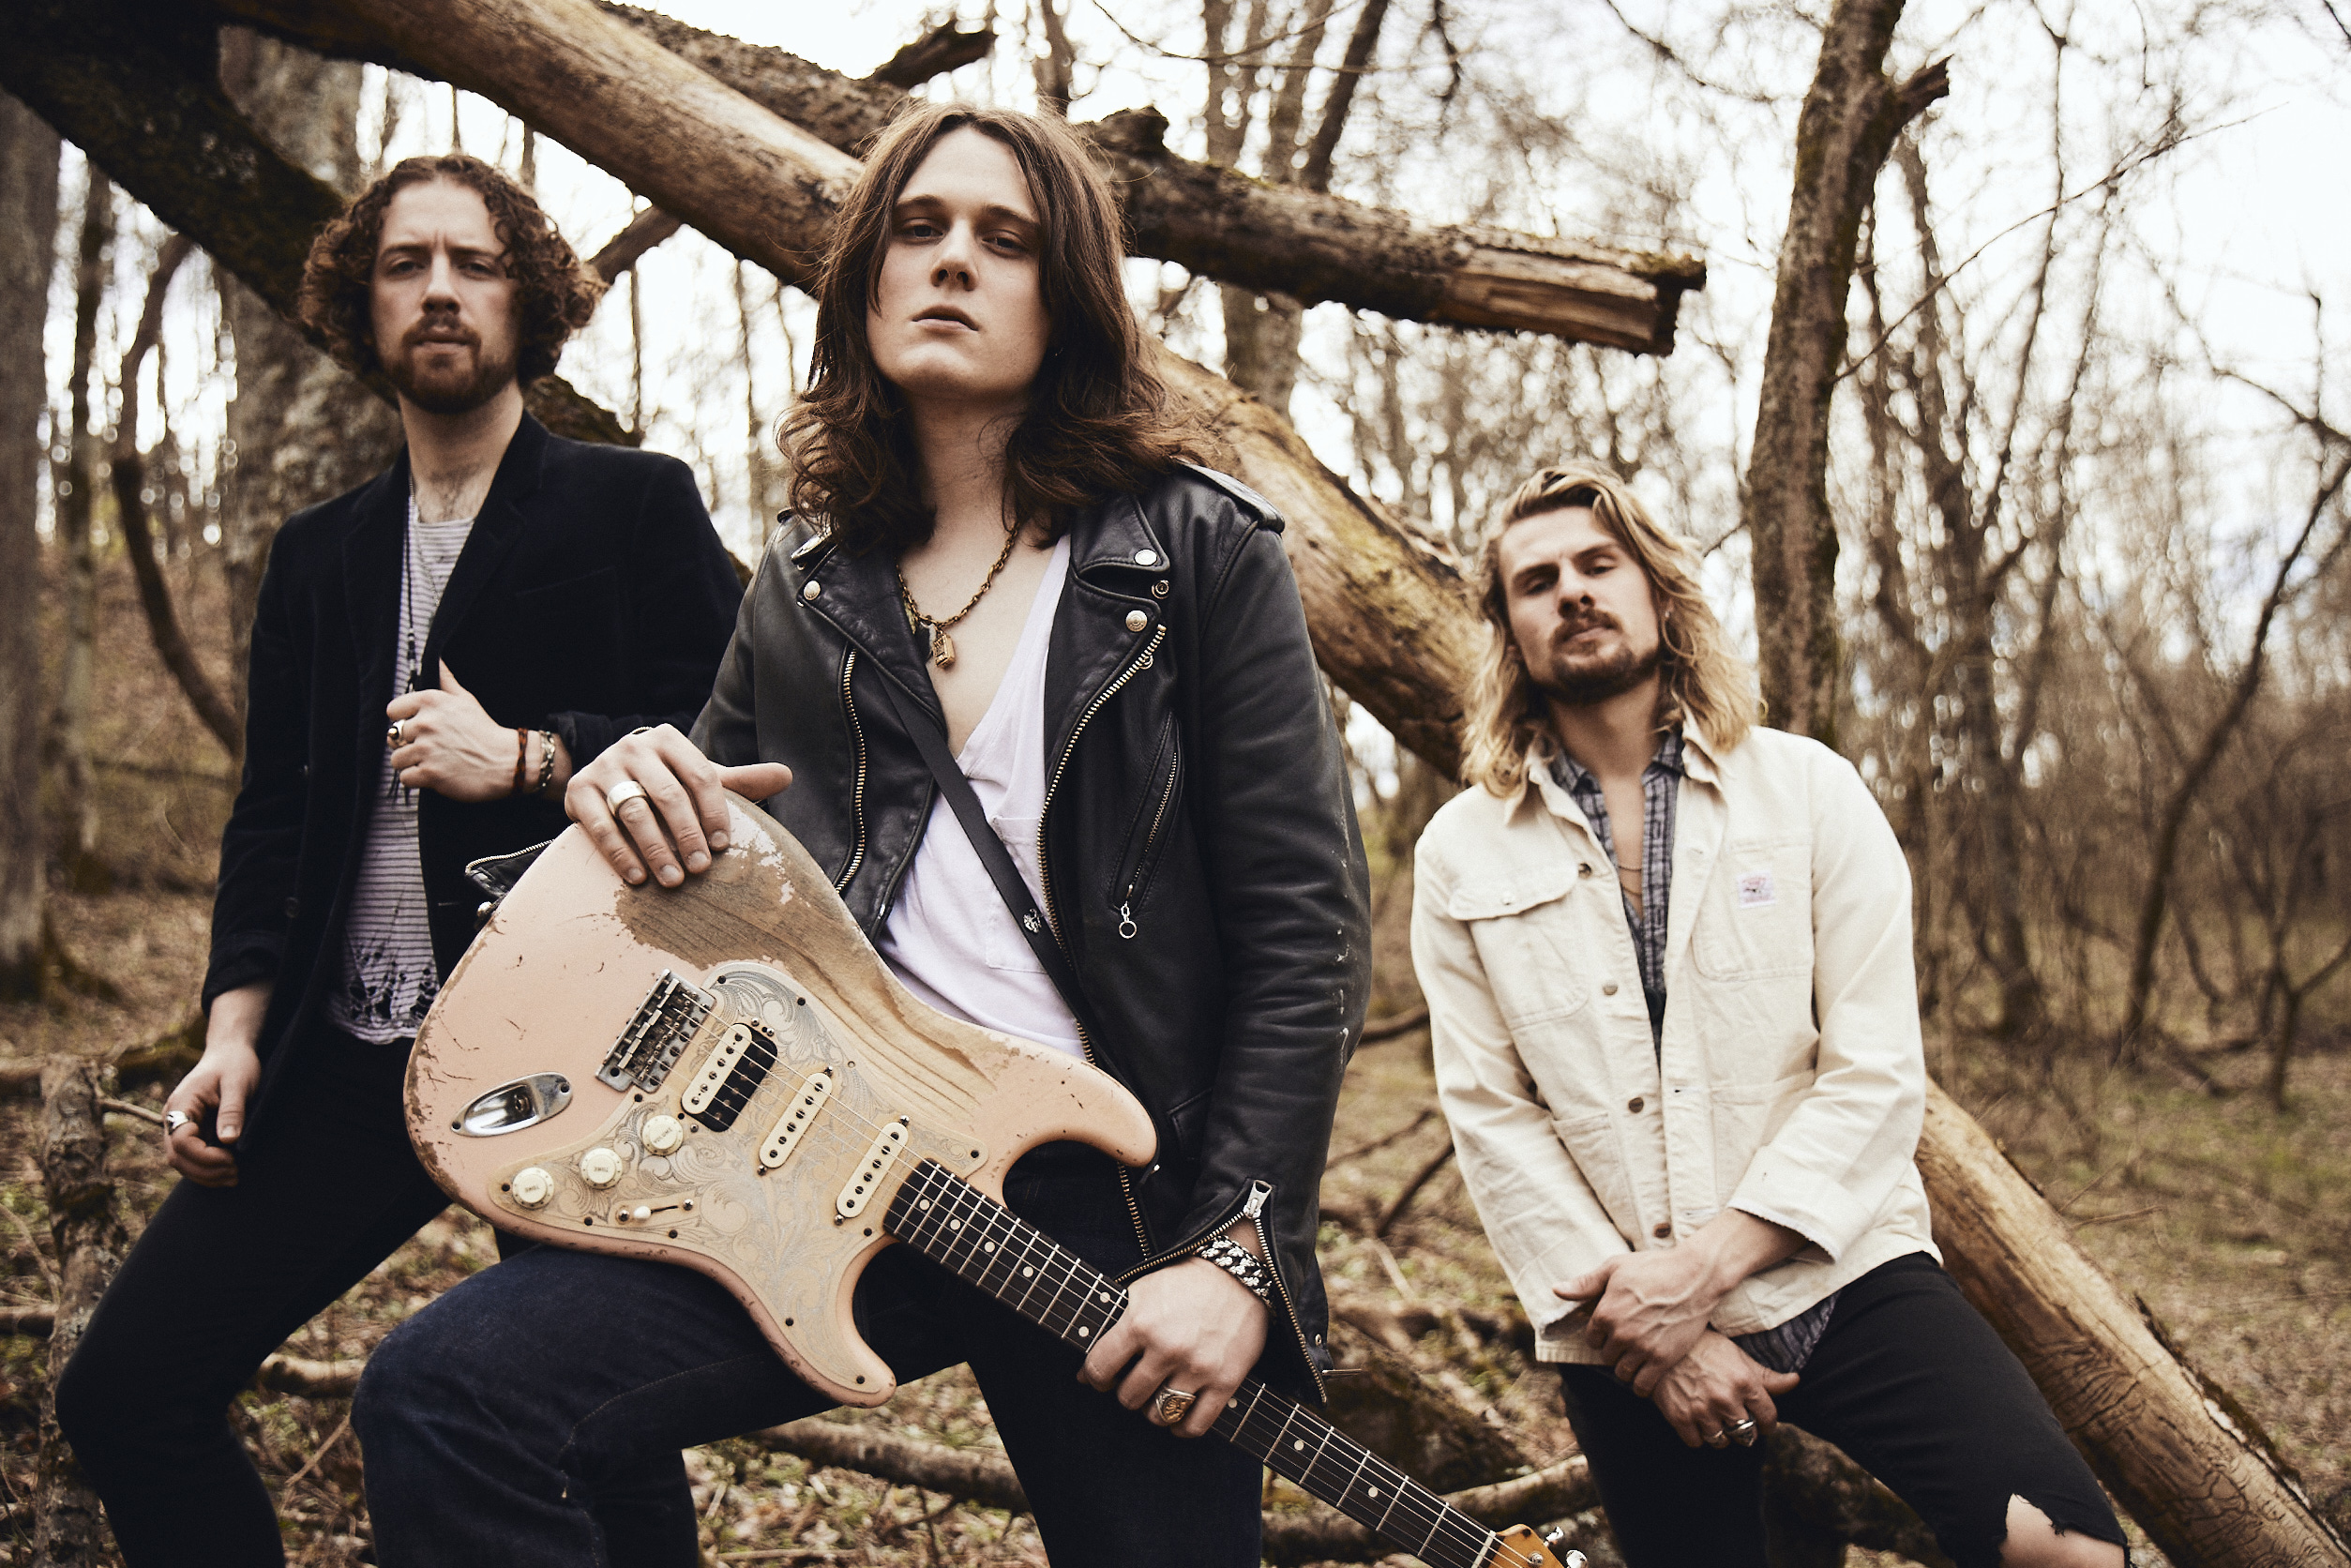 Tyler Bryant & The Shakedown to release new album ‘Shake the Roots’ via Rattle Shake Records